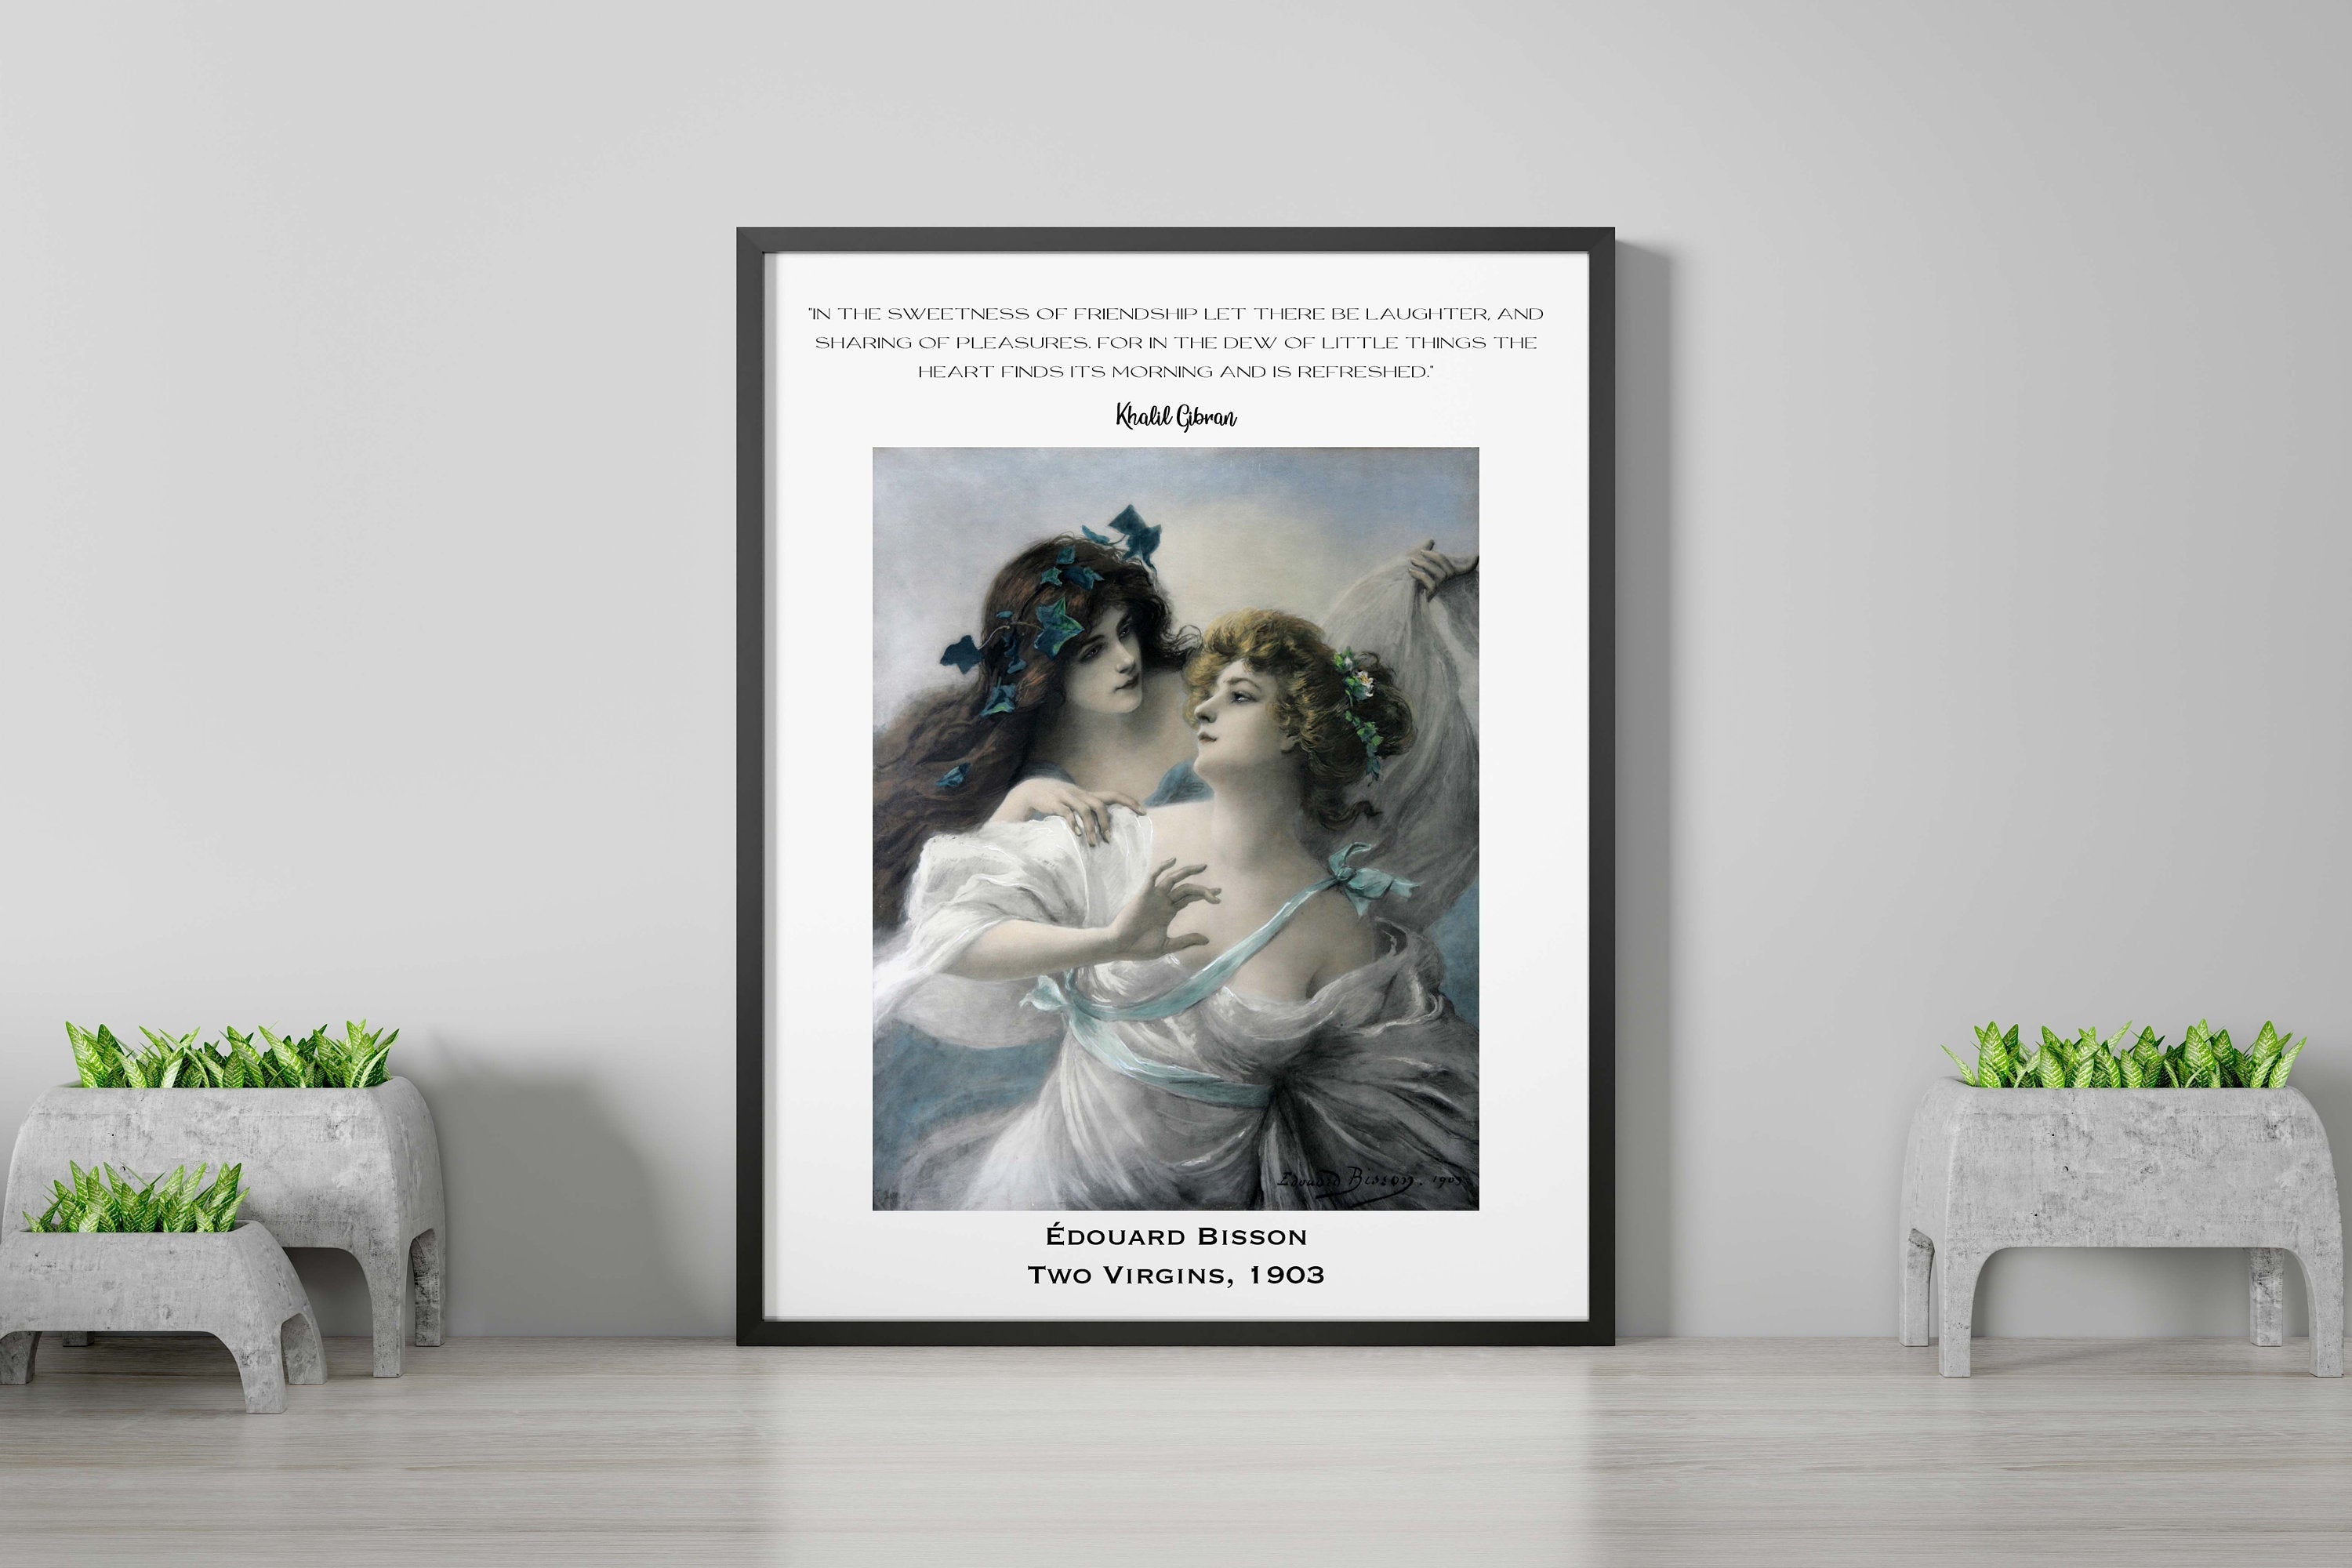 Khalil Gibran The Prophet and Edouard Bisson - Two Virgins In the Sweetness of Friendship Art Print